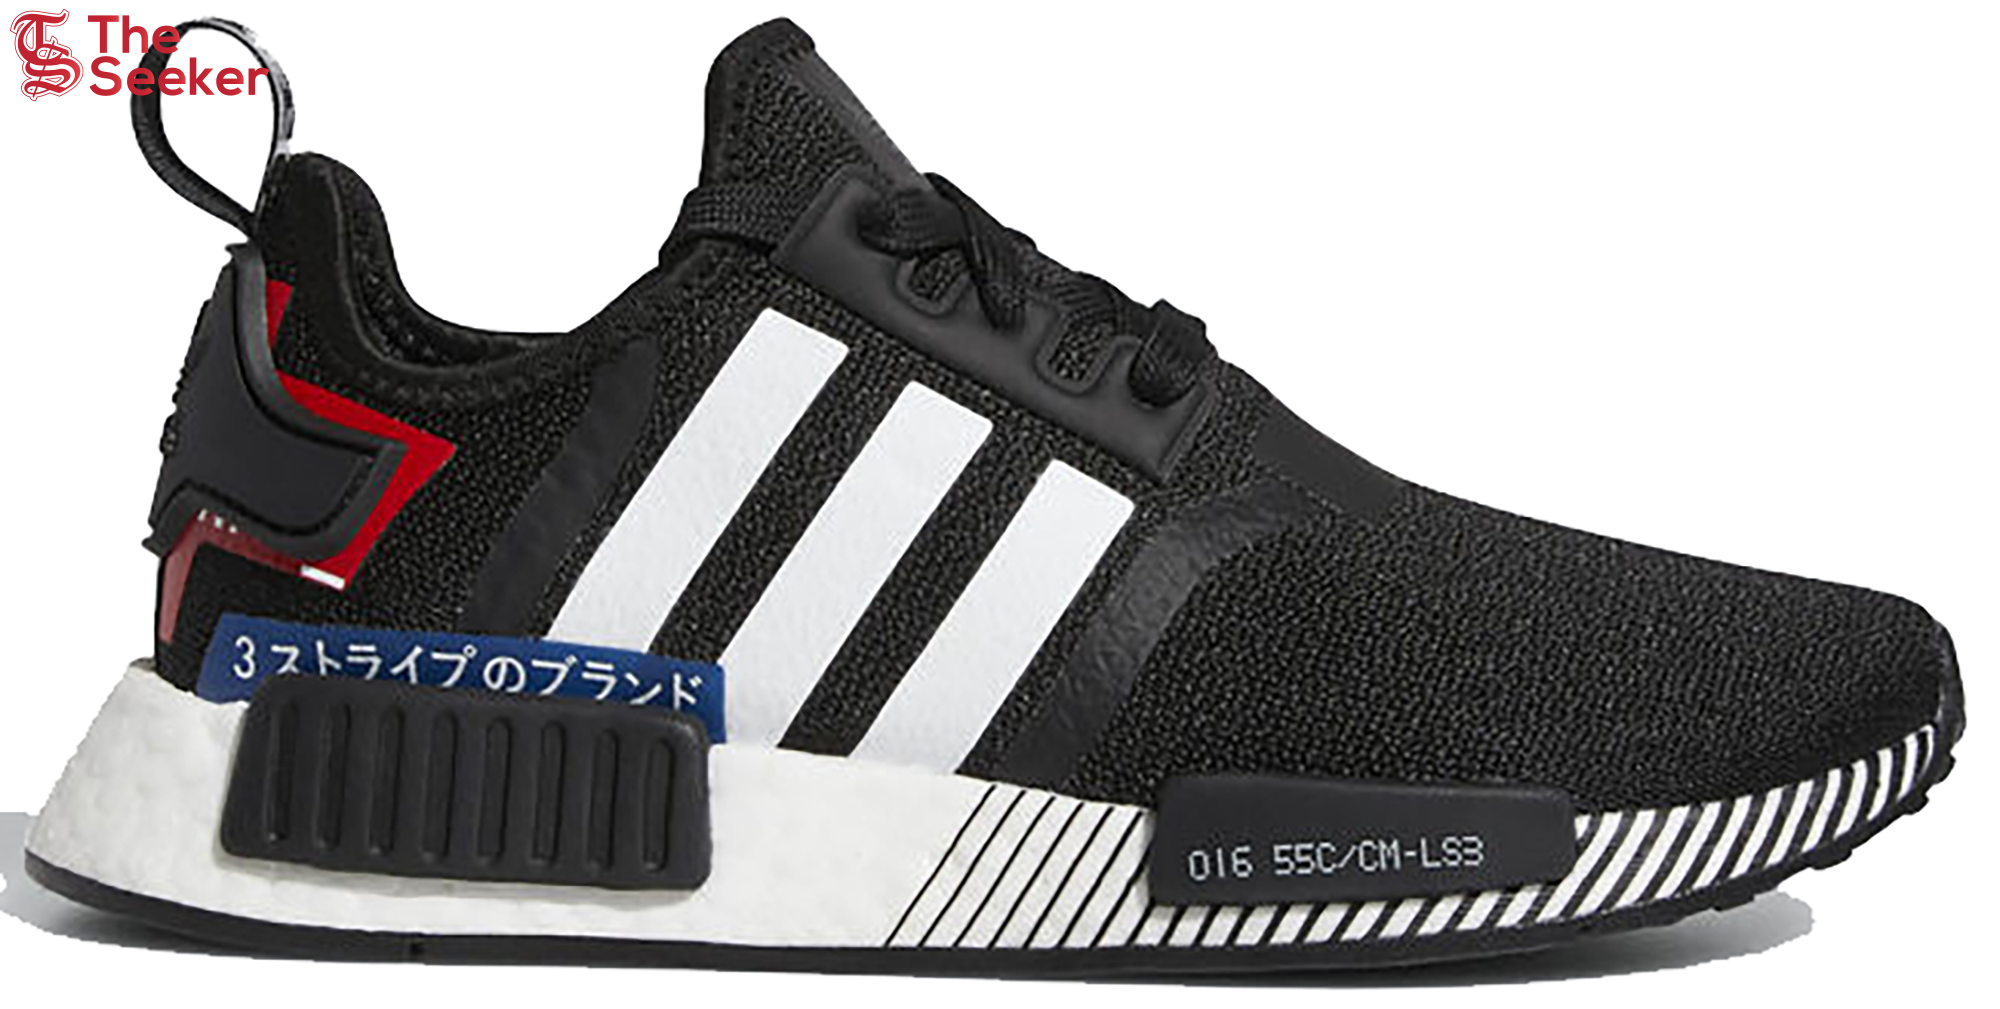 adidas NMD R1 Japan Pack Black White (Youth)